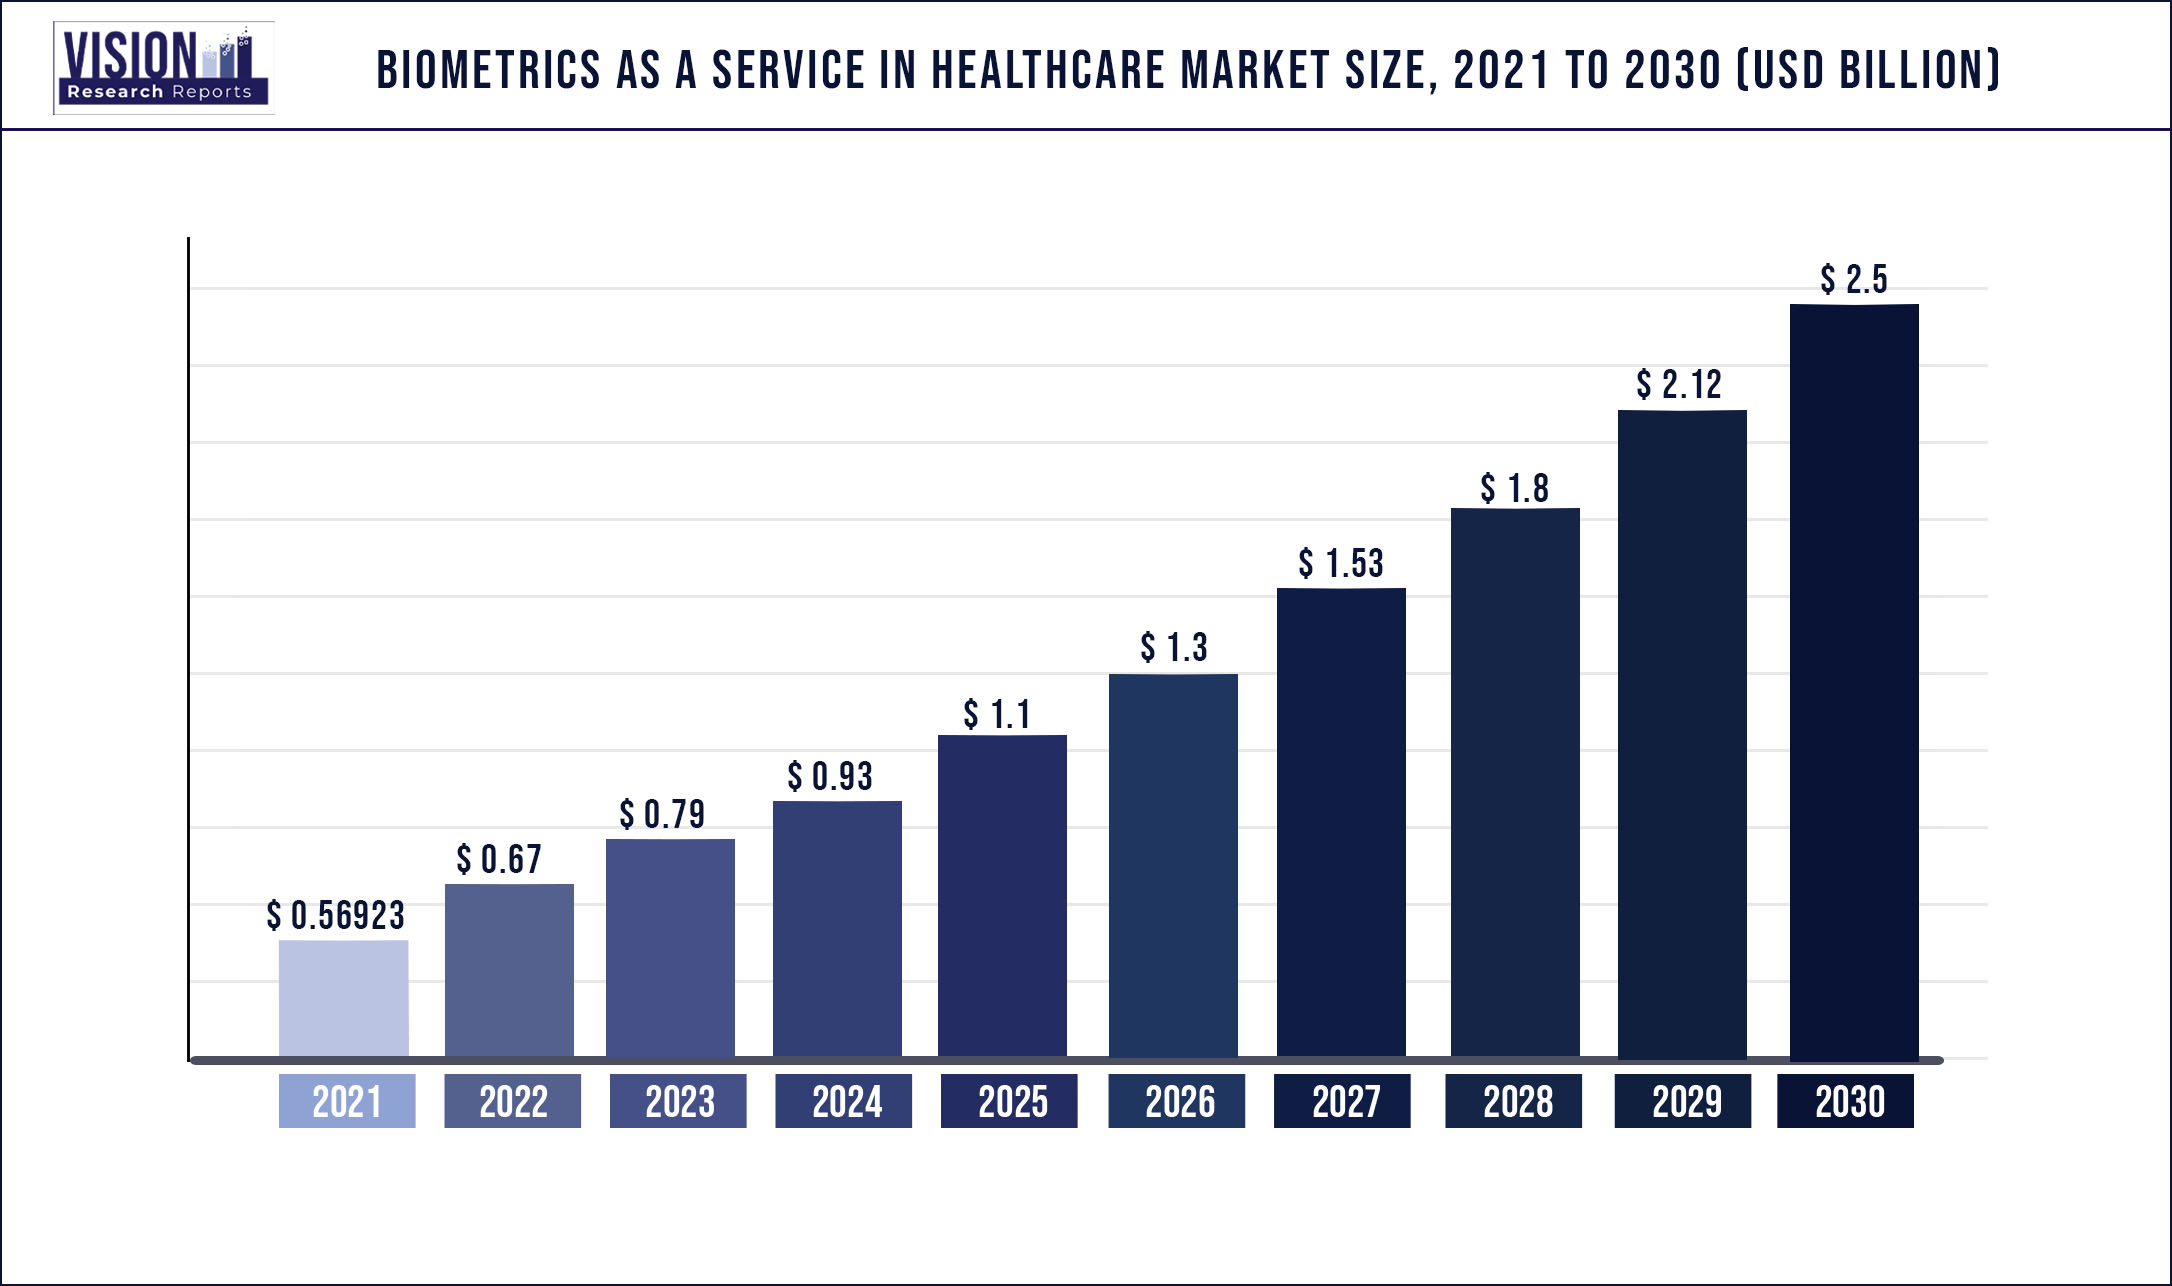 Biometrics As A Service In Healthcare Market Size 2021 to 2030